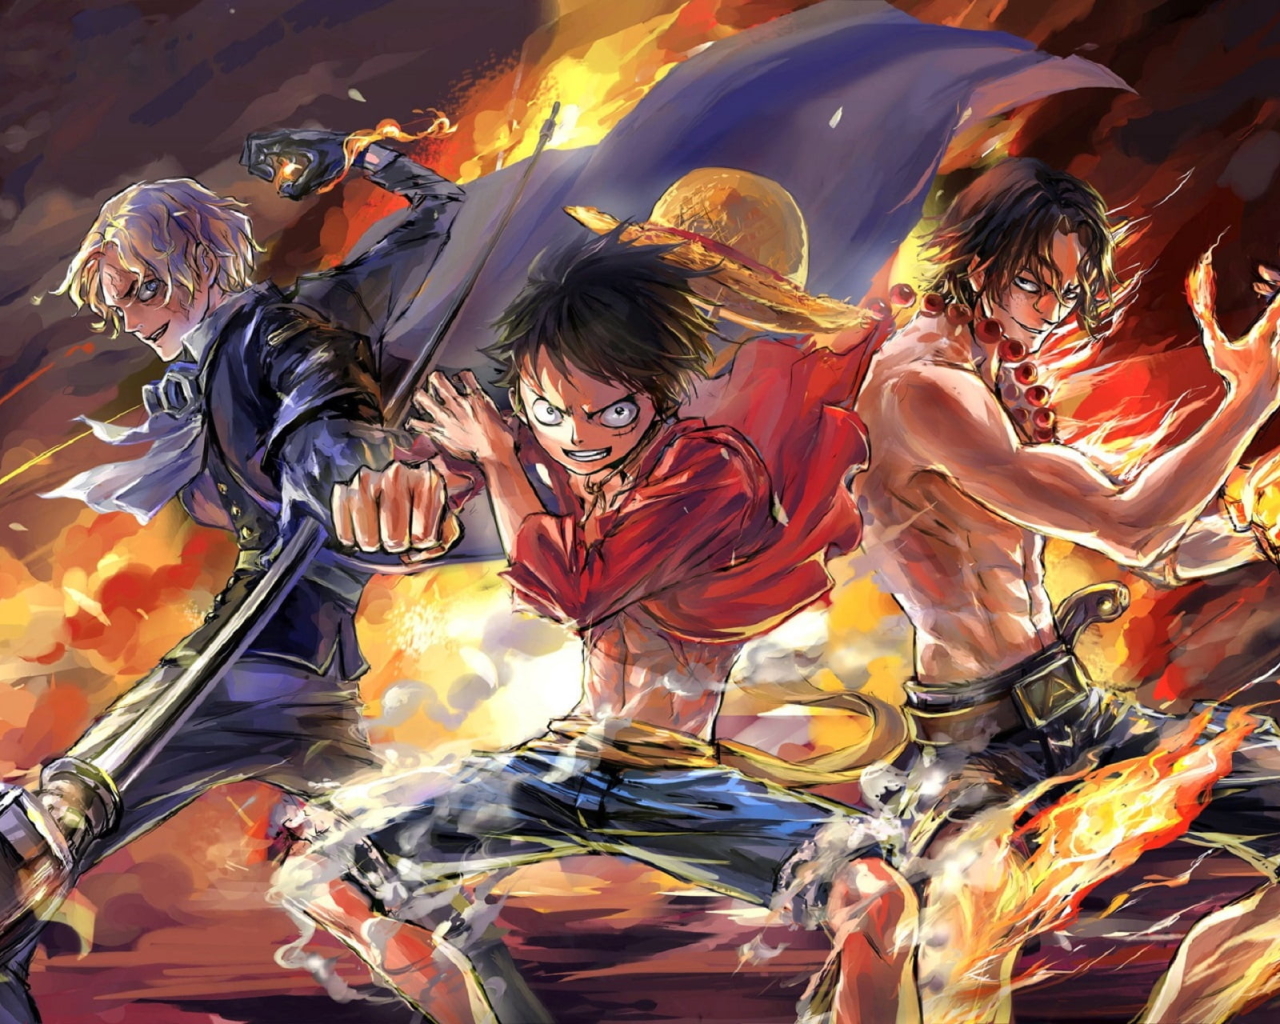 1280x1024 Resolution Luffy, Ace and Sabo One Piece Team 1280x1024 ...